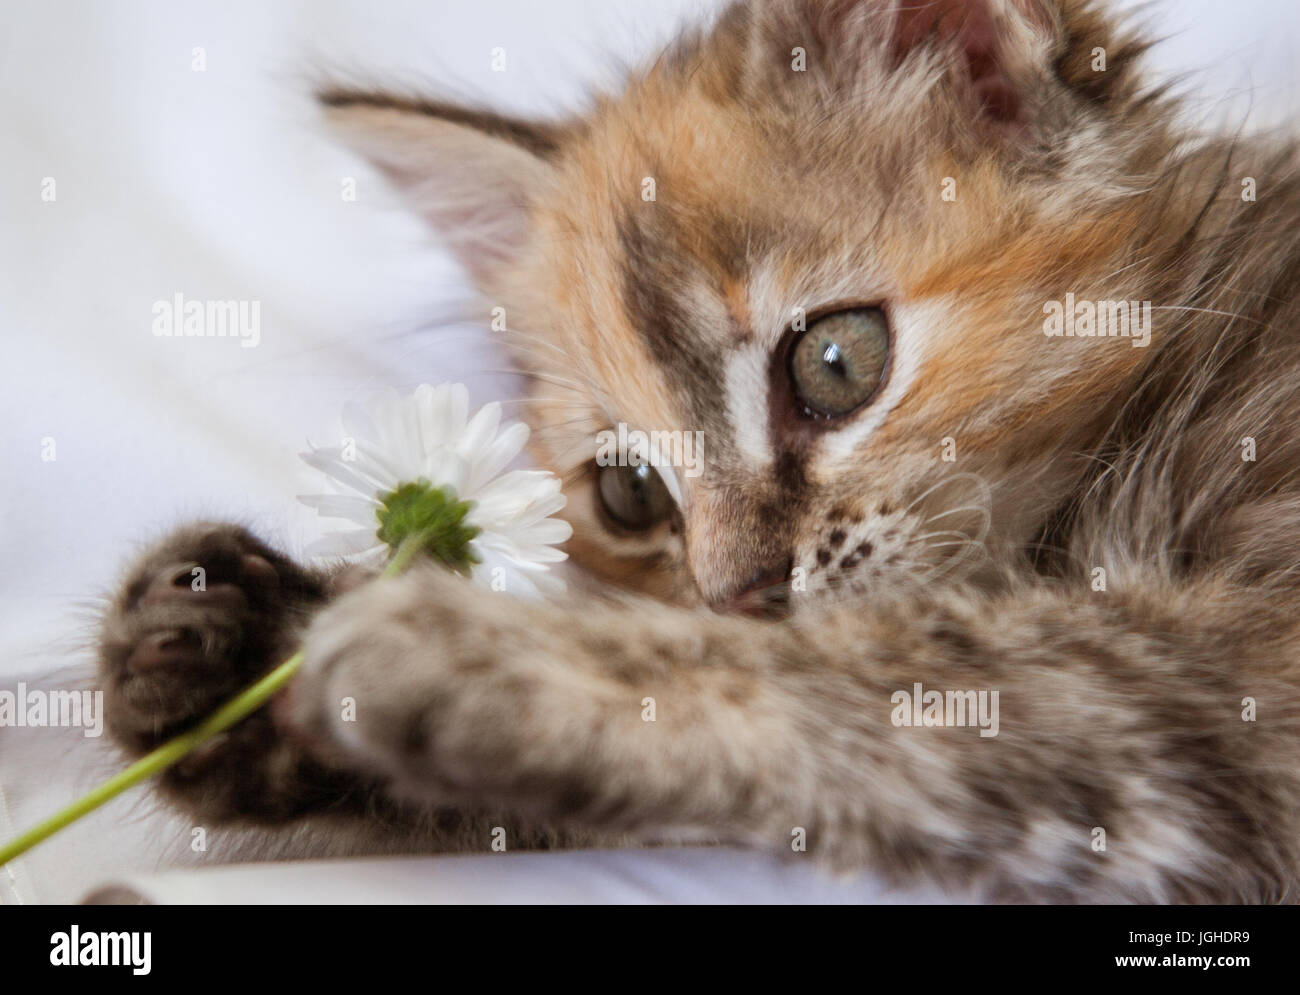 A curious kitten playing with a daisy Stock Photo